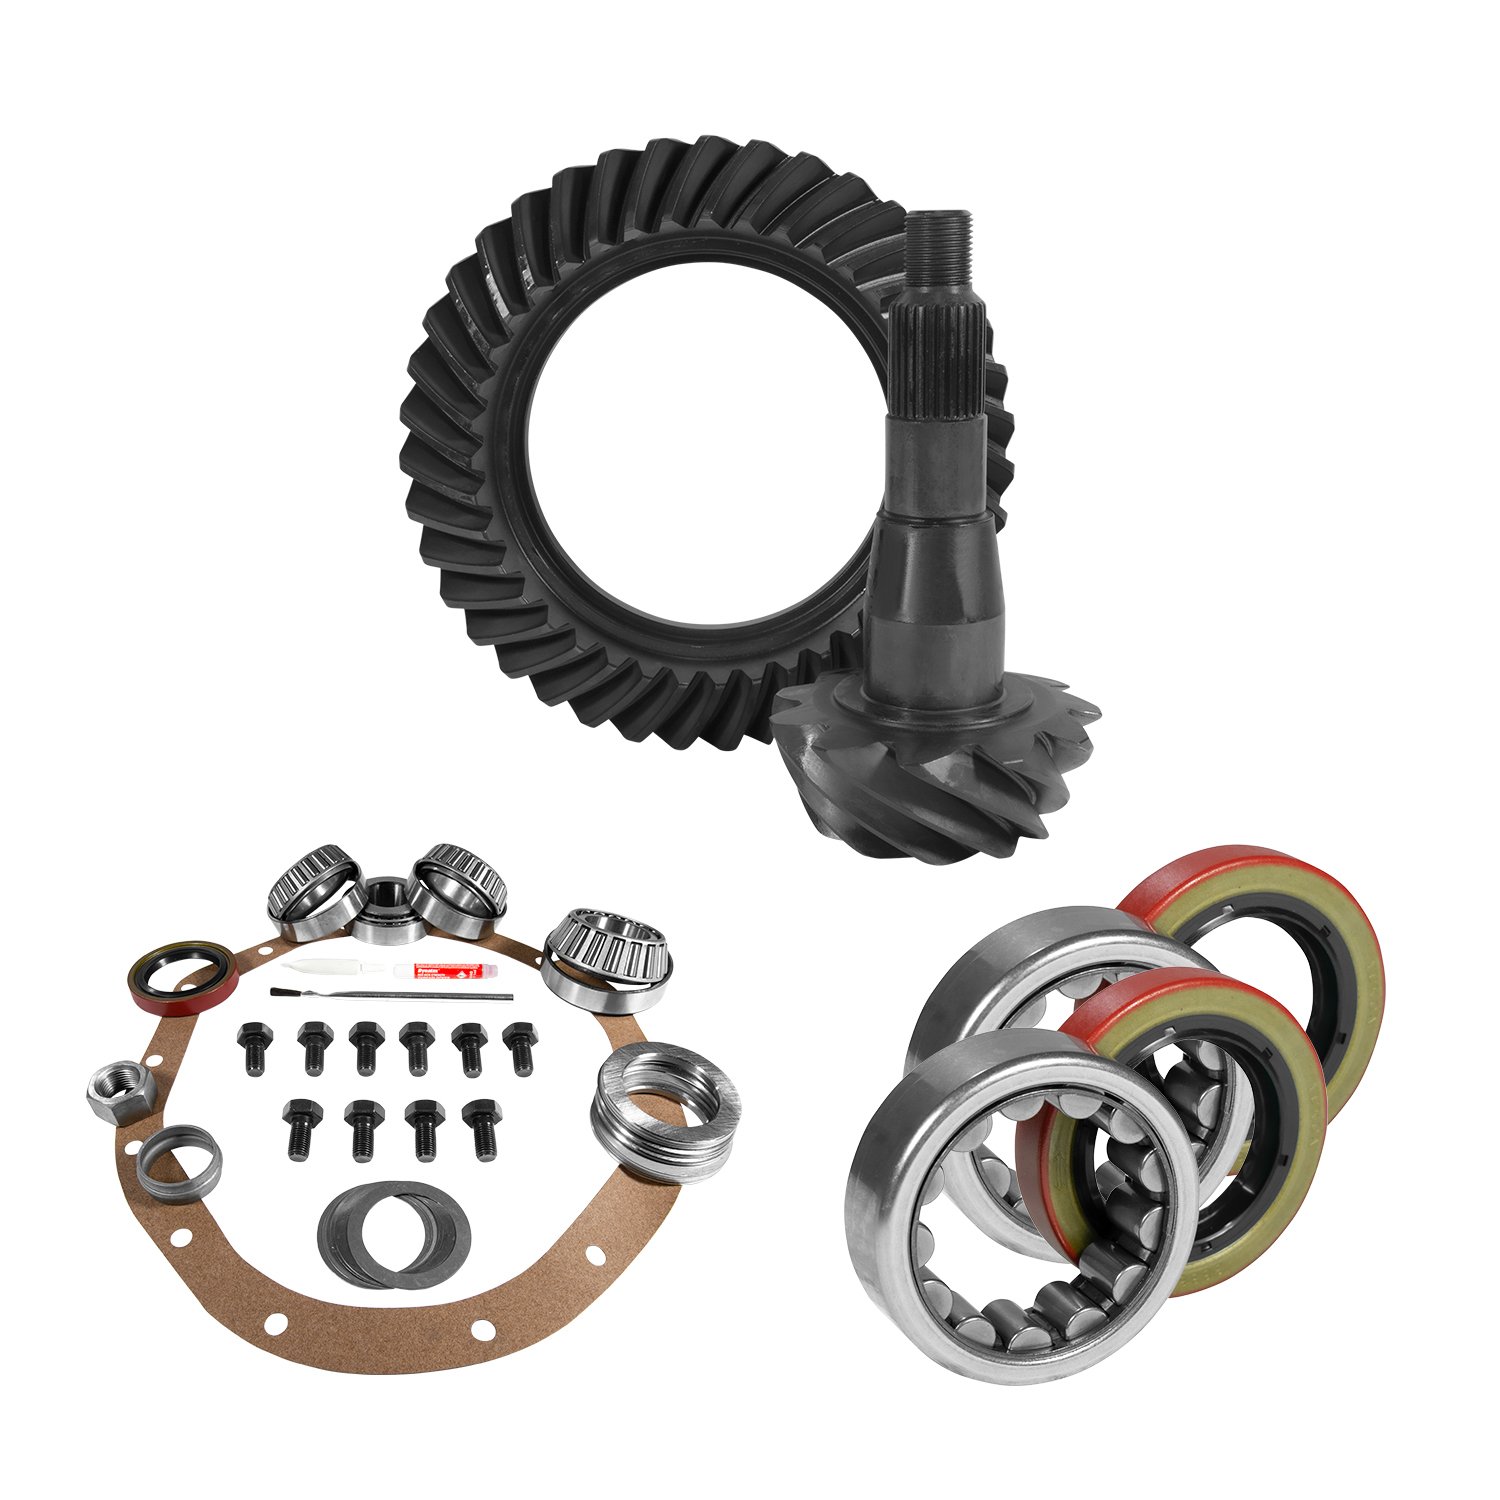 USA Standard 10783 9.25 in. Chy 3.91 Rear Ring & Pinion Install Kit, 1.62 in. Id Axle Bearings & Seal